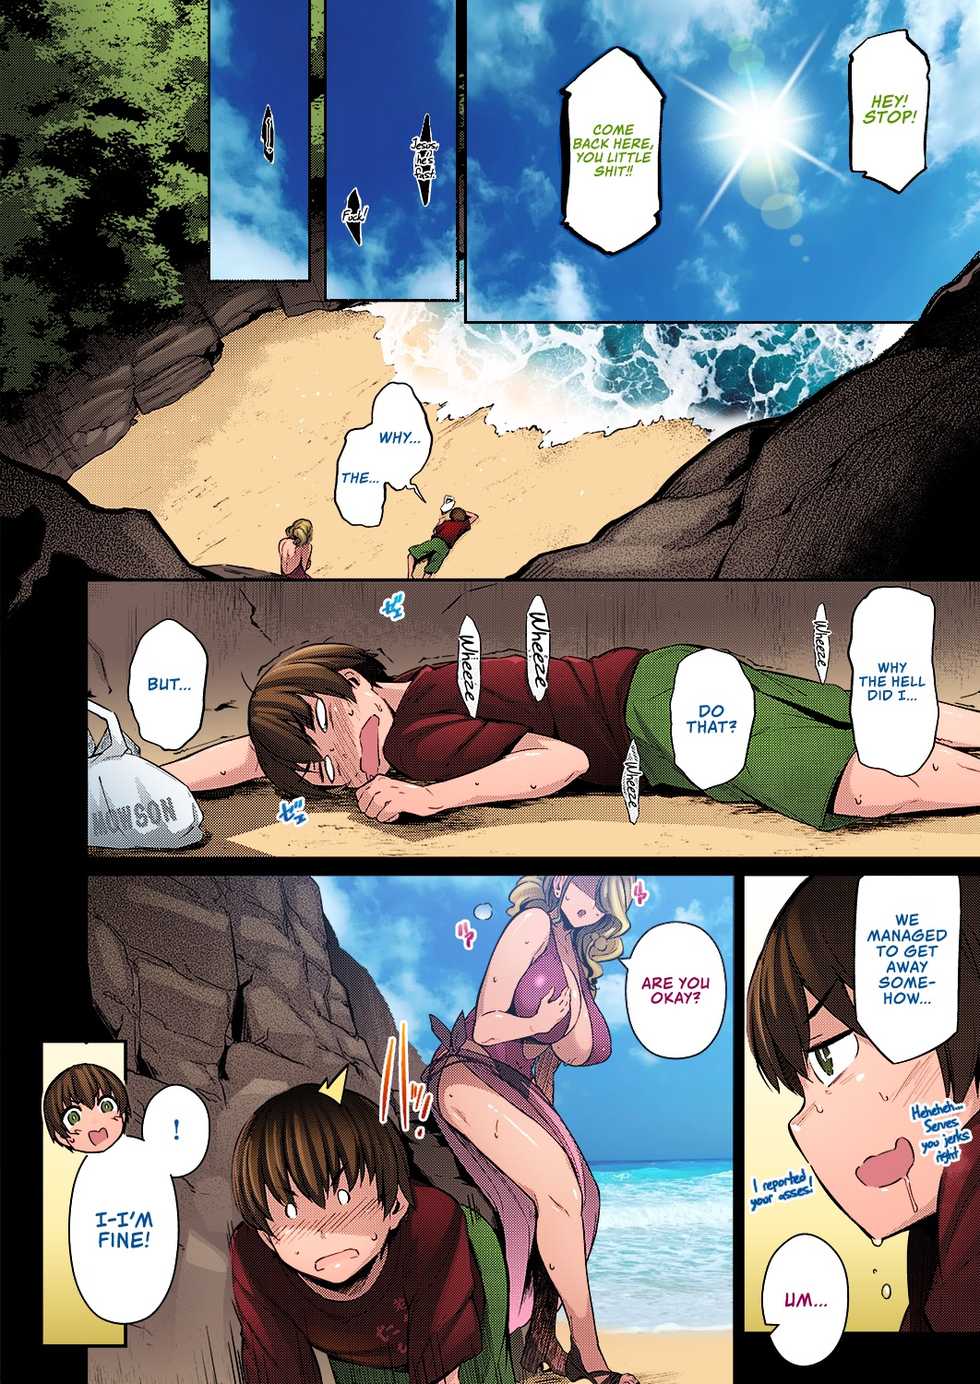 [Kuronomiki] Last Summer (Comic EXE 16) [English] =The Lost Light + Red Lantern= [Colorized] [Digital] - Page 6